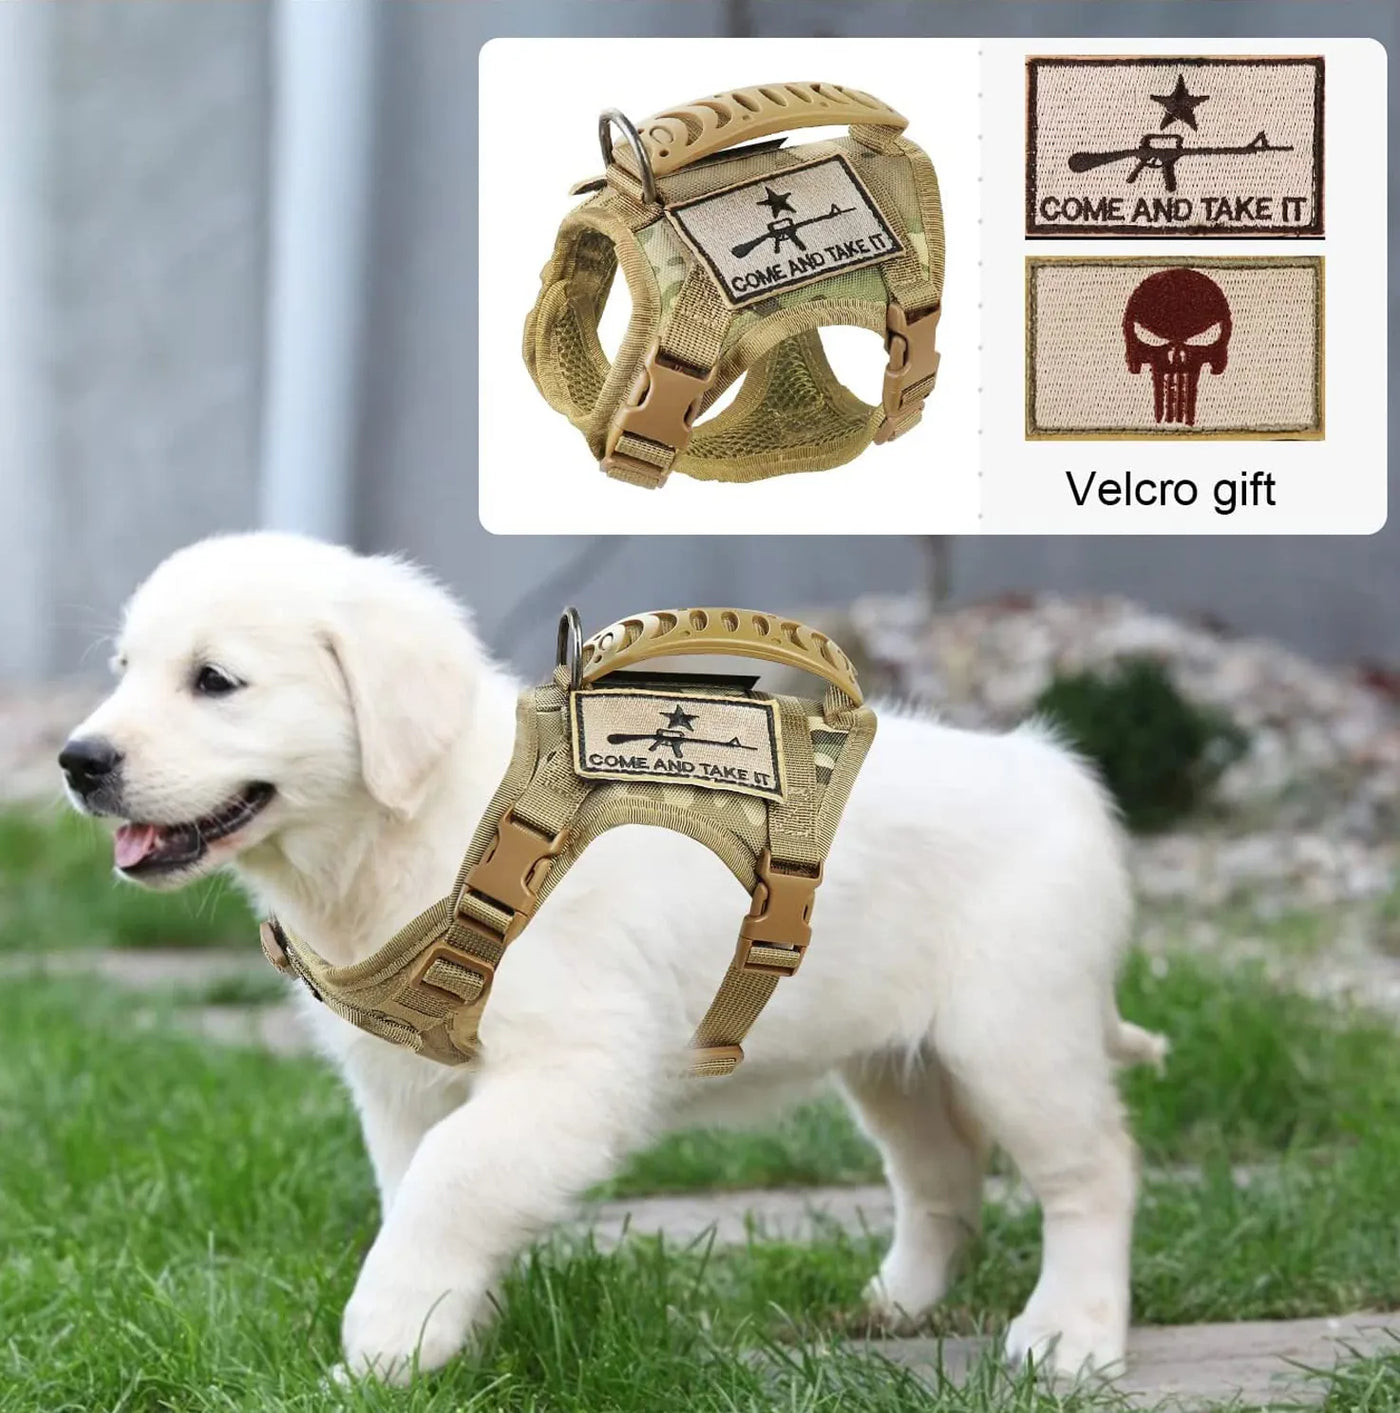 Puppy Tactical Vest Training Harness Adjustable Military Outdoor